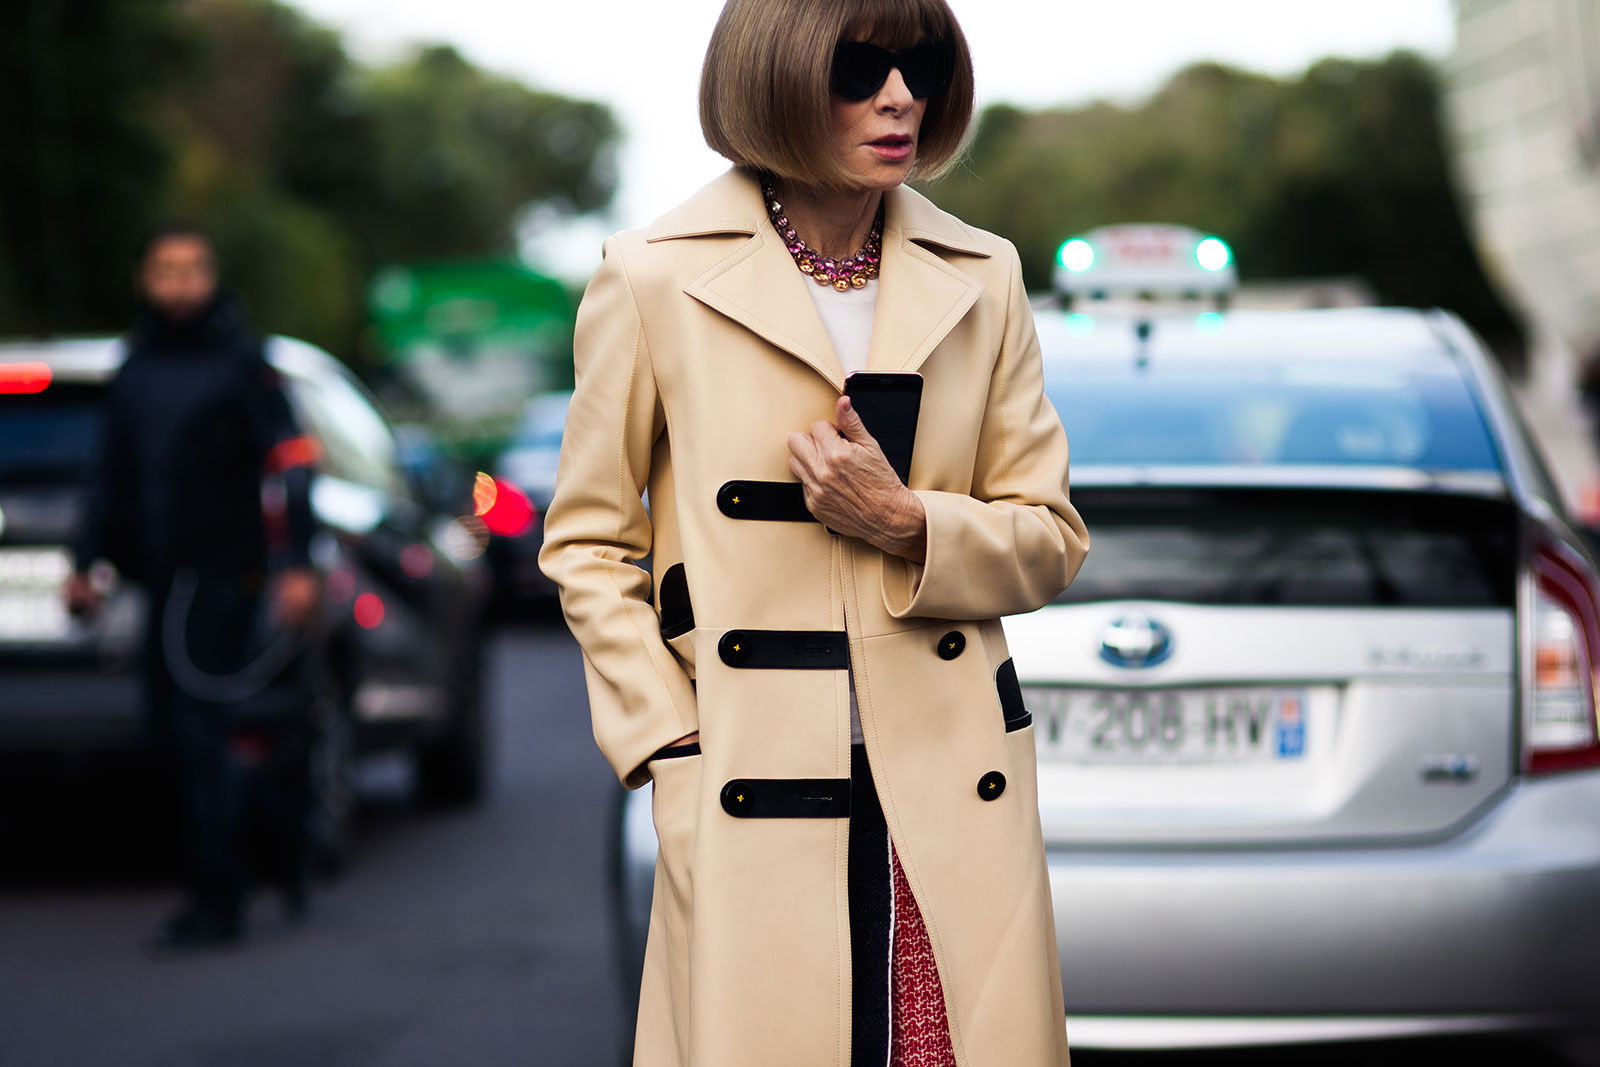 Anna Wintour | Shot By Gio